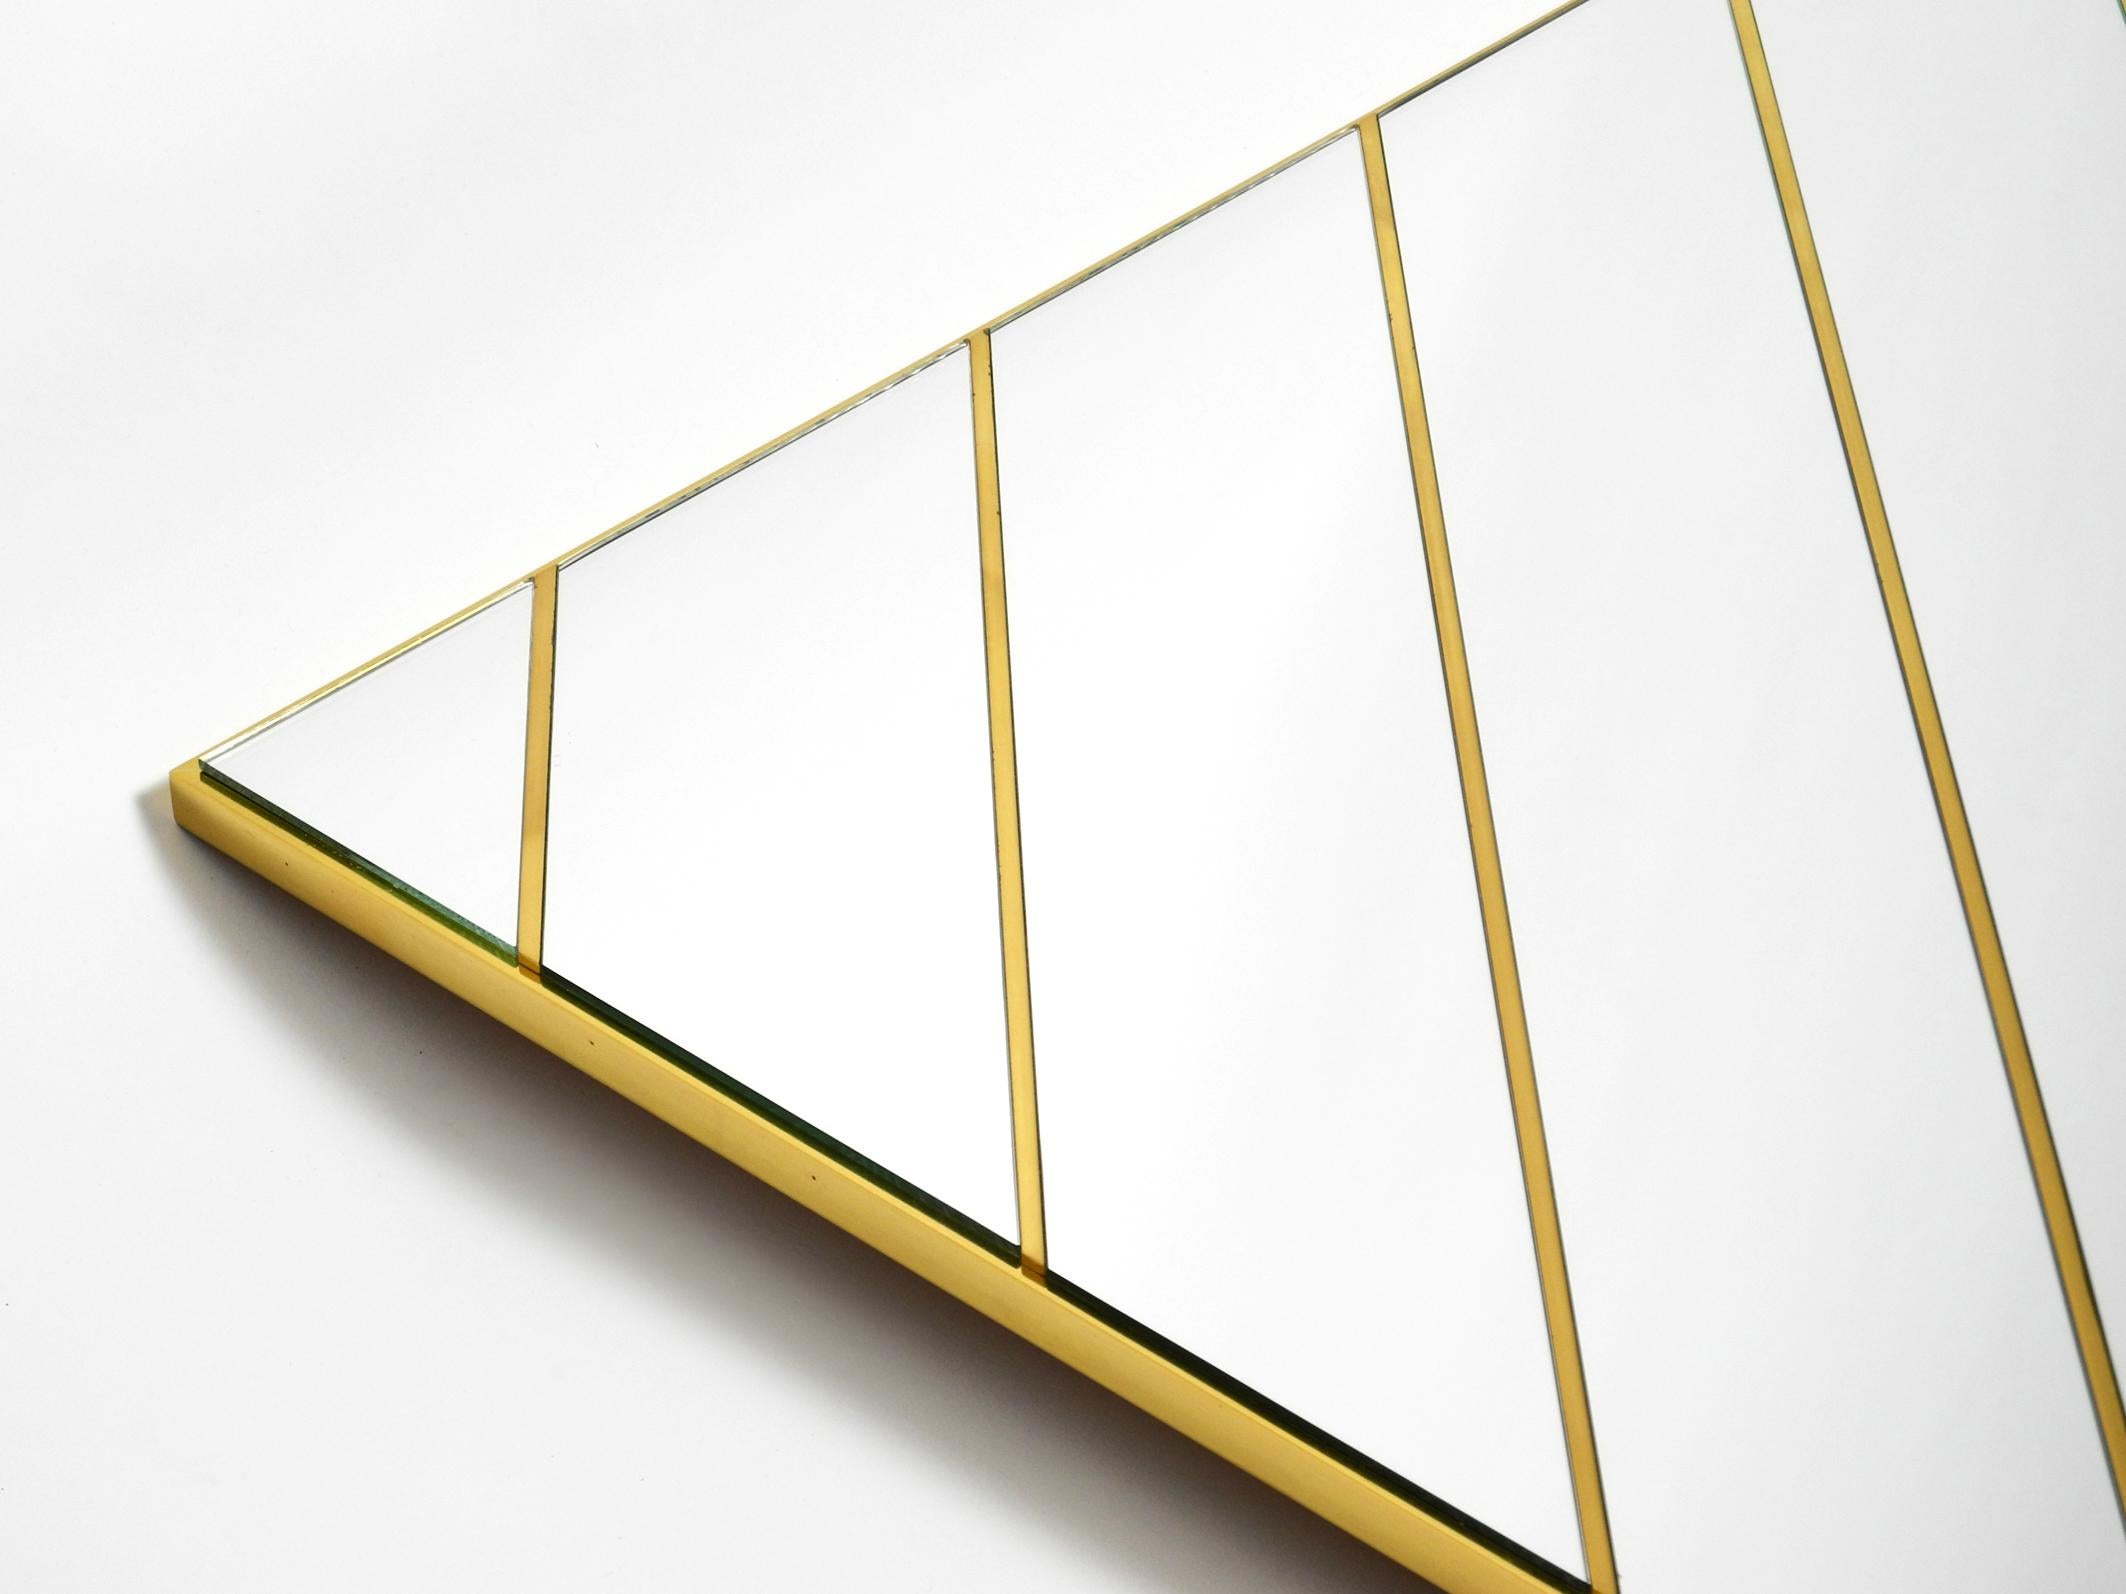 Large, Exceptional 1970s Brass Wall Mirror with Diagonal Mirror Strips For Sale 8